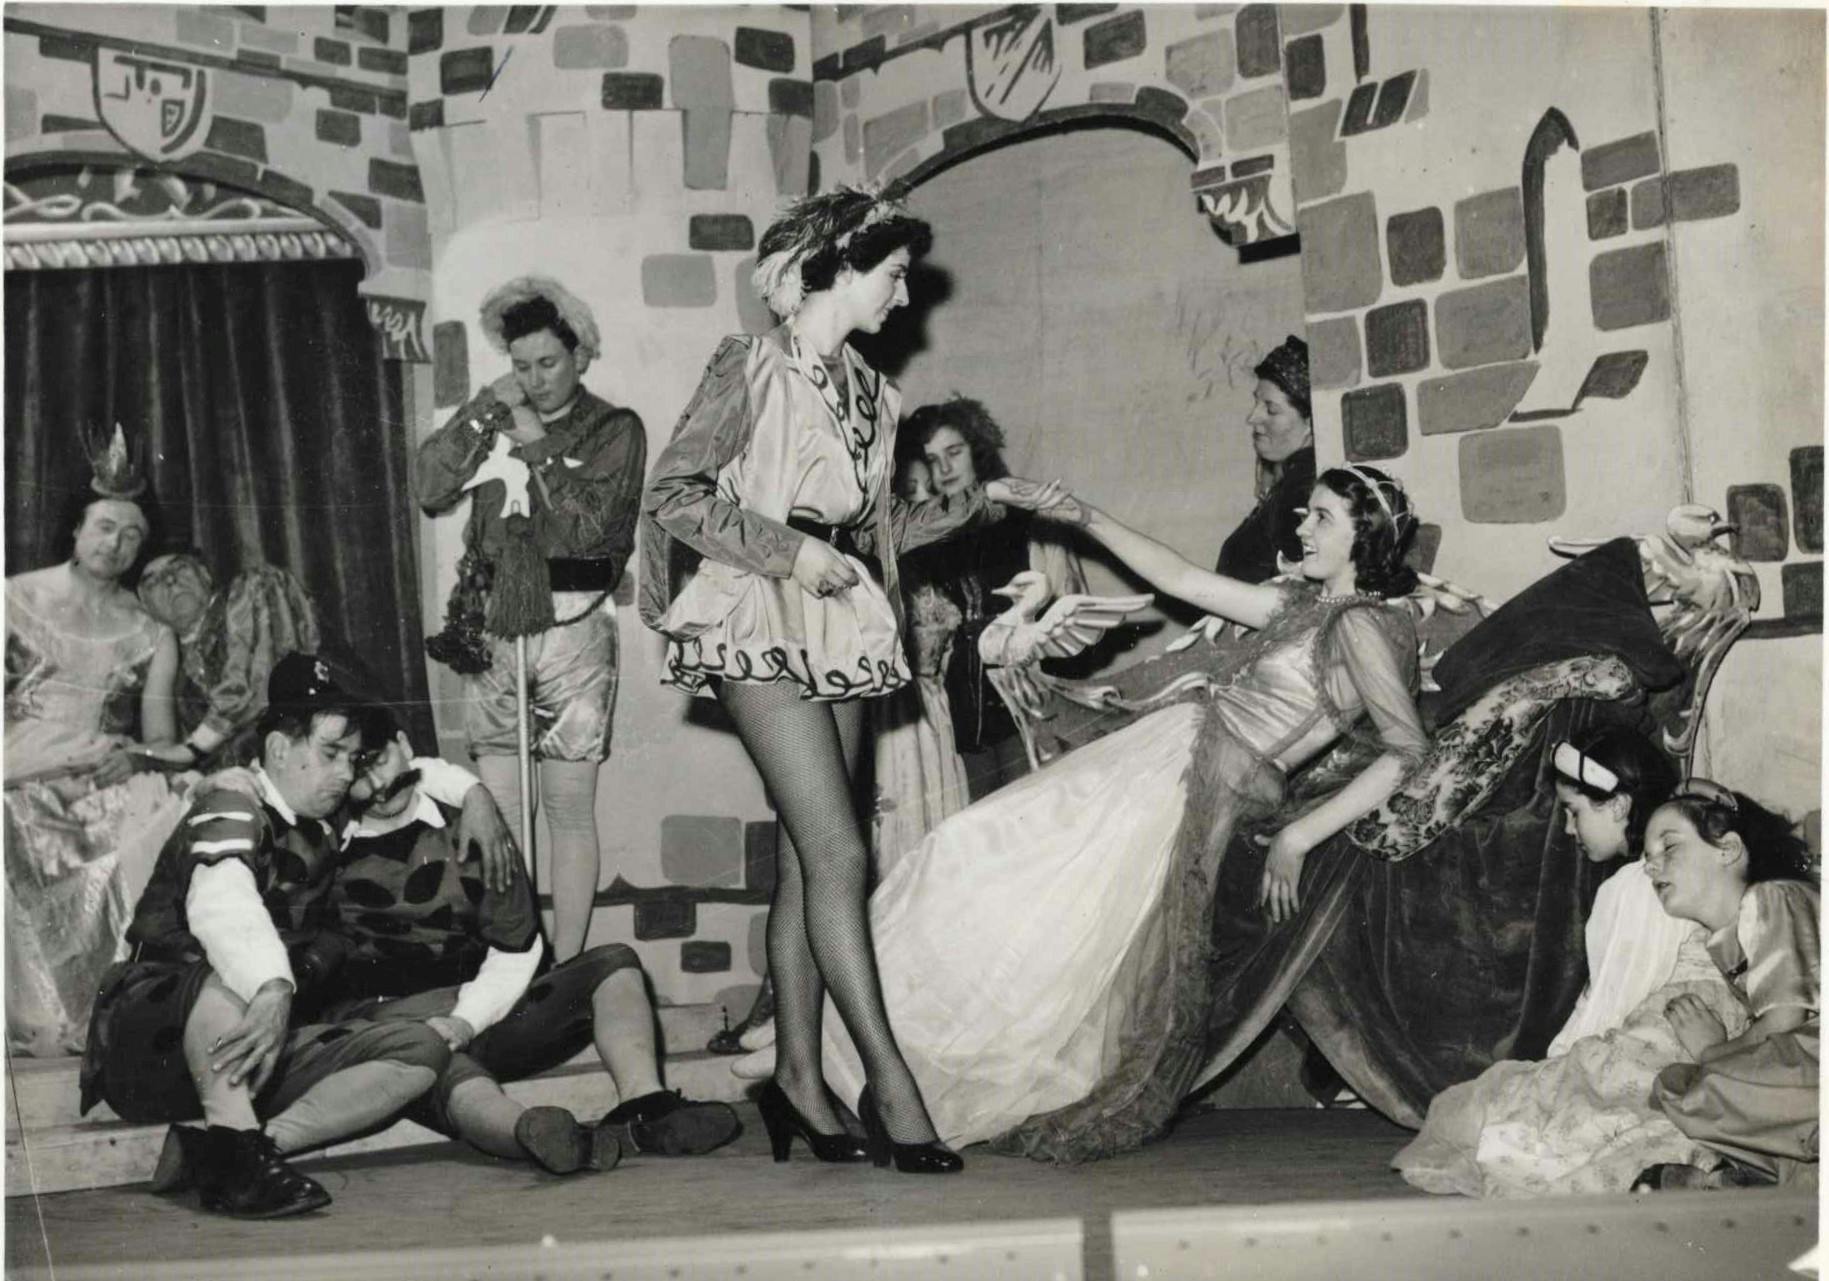 S.C.A.M.P.S performance of Sleeping Beauty in 1955 with the cast on stage 